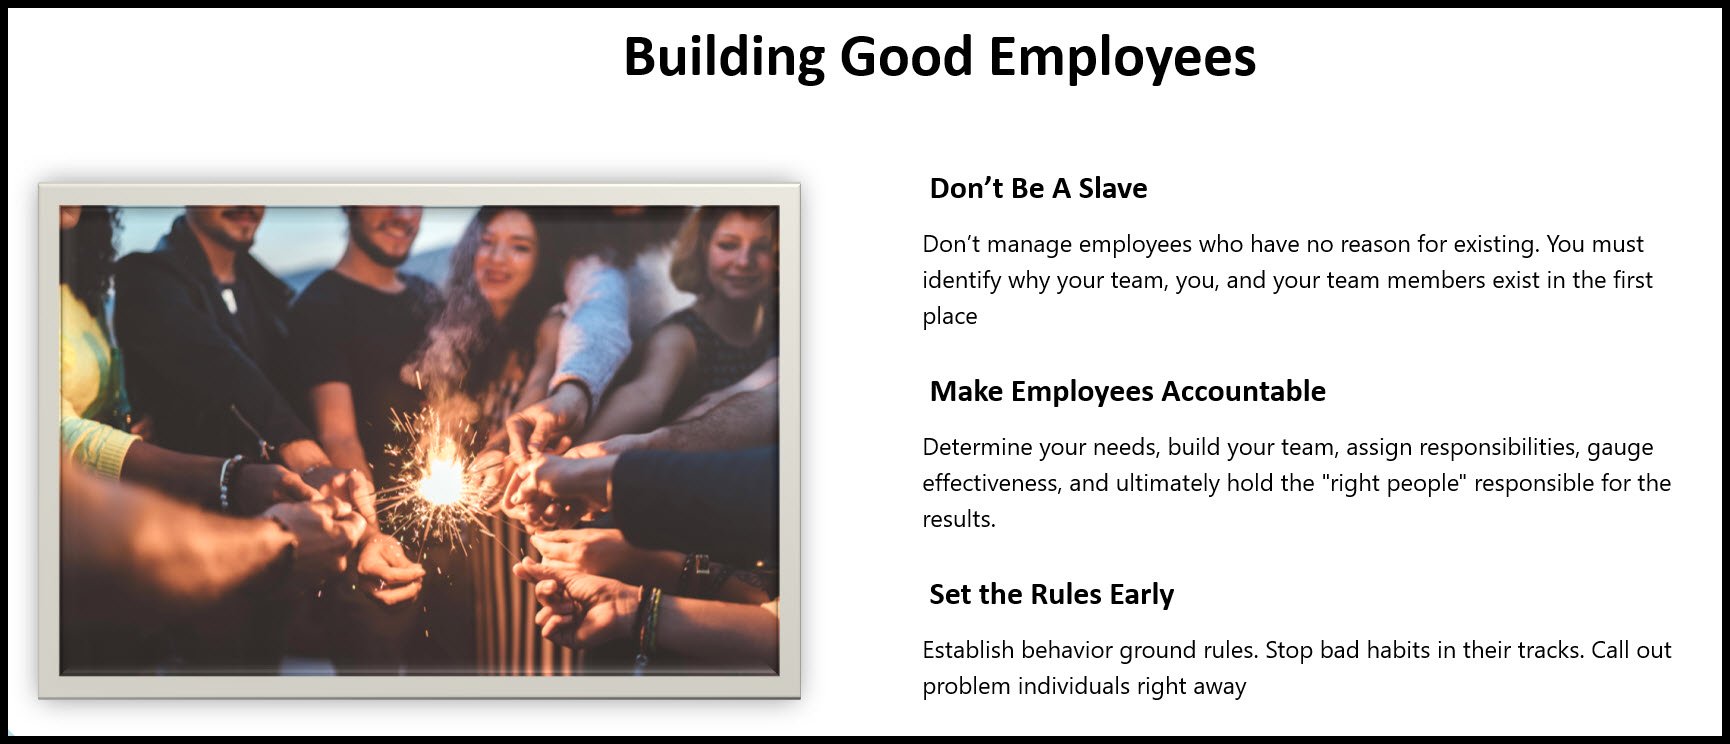 Business management includes building good employees. Learn the leadership steps to assure your employees align with your business. 